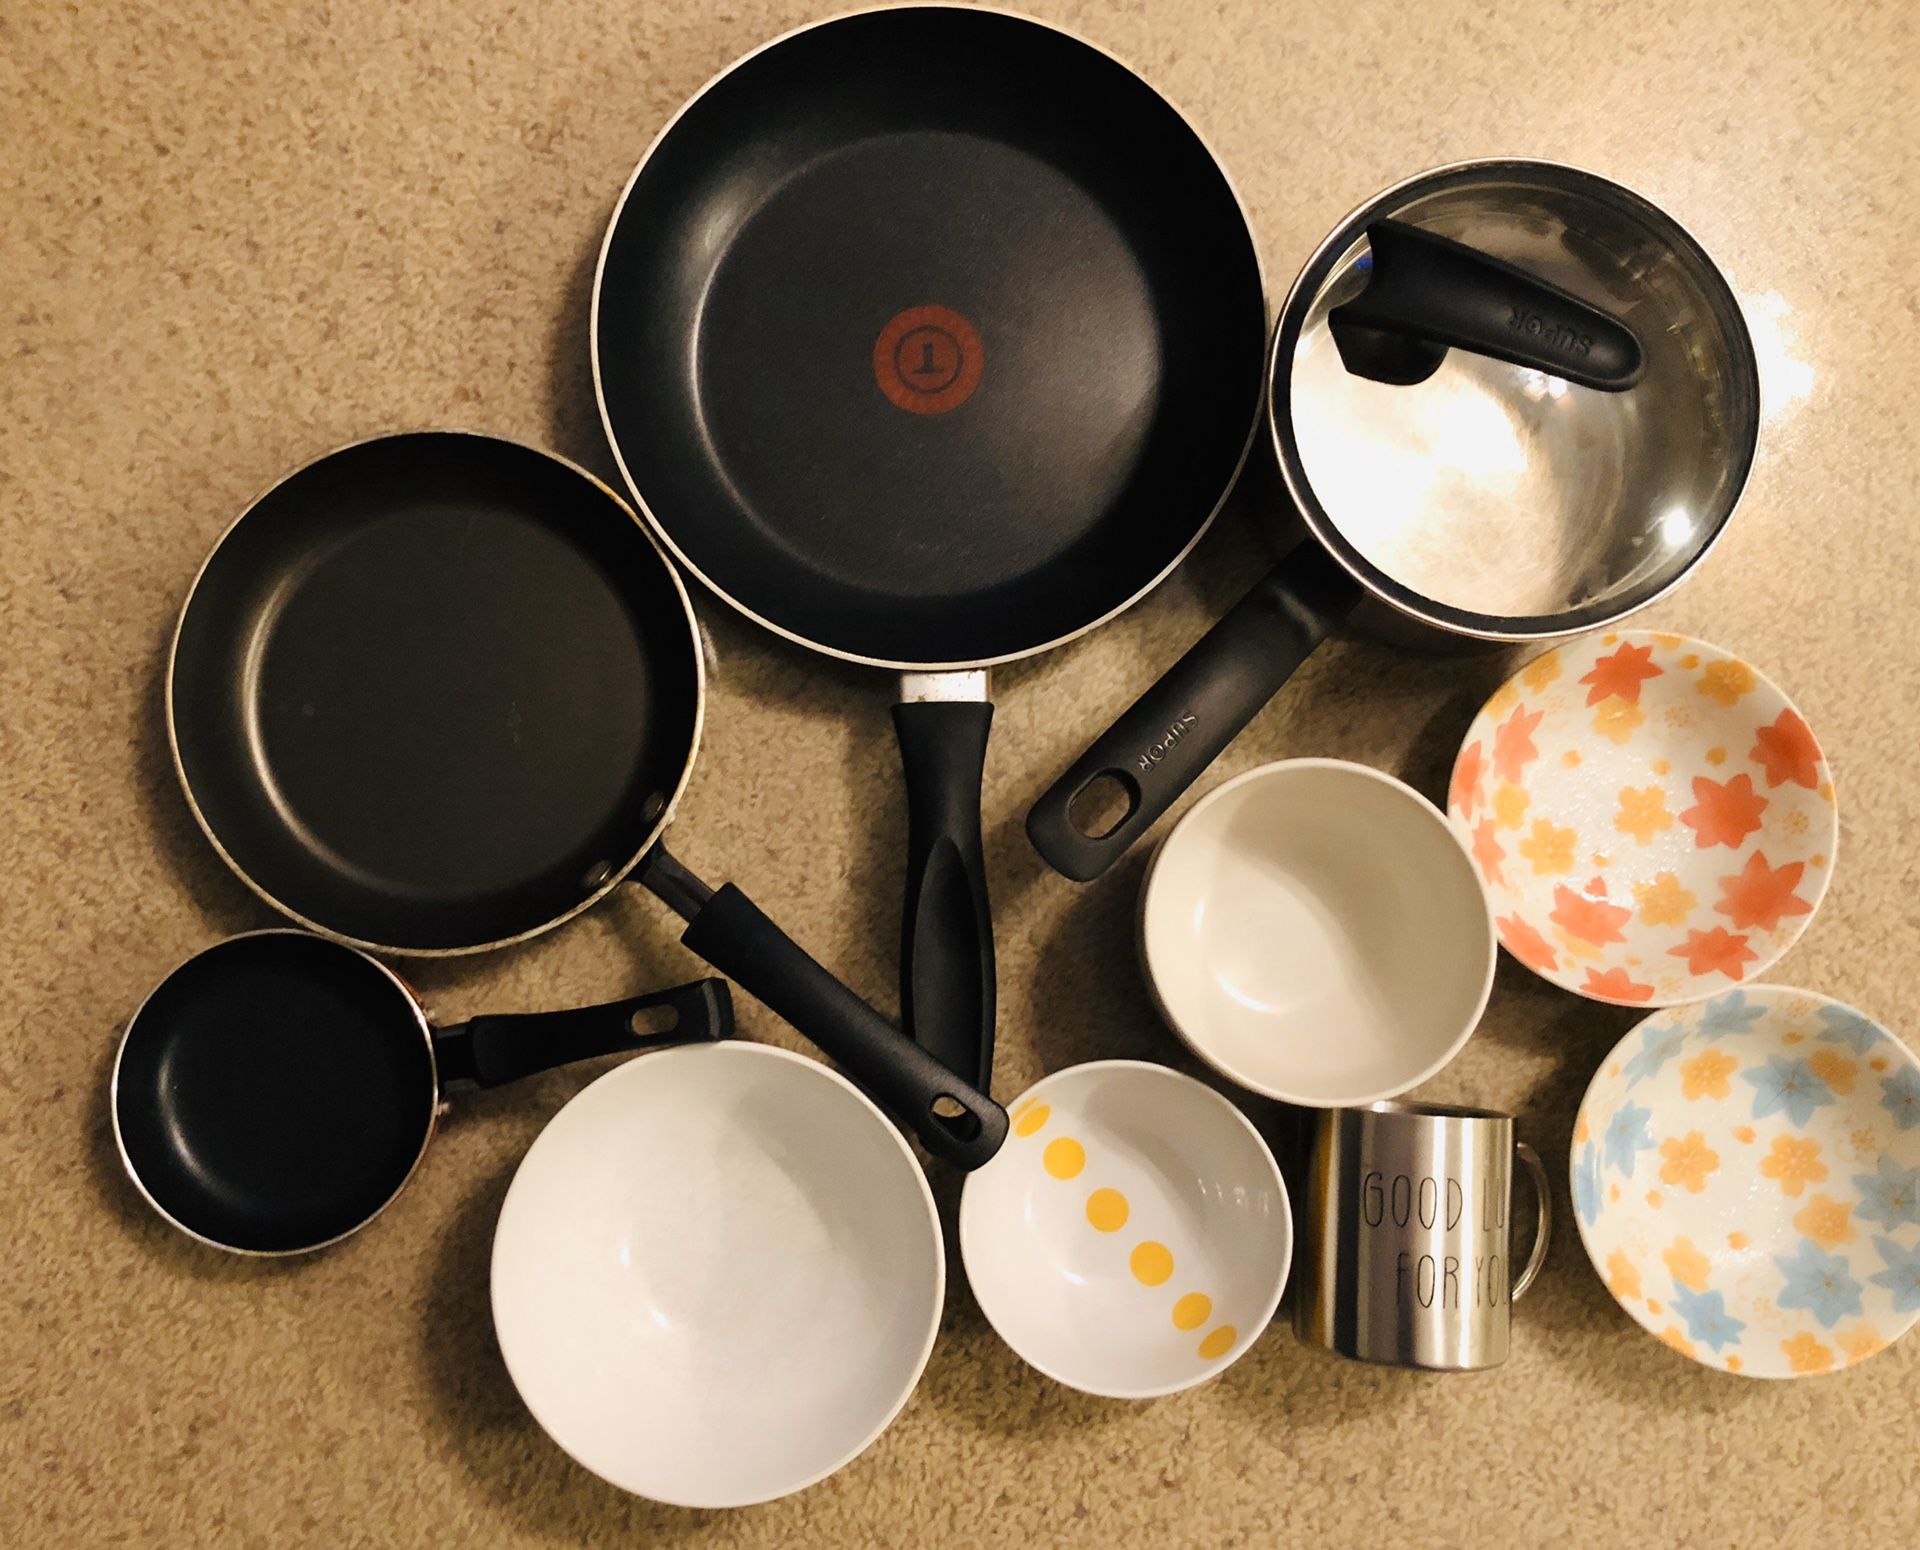 Pots and pans and dishes